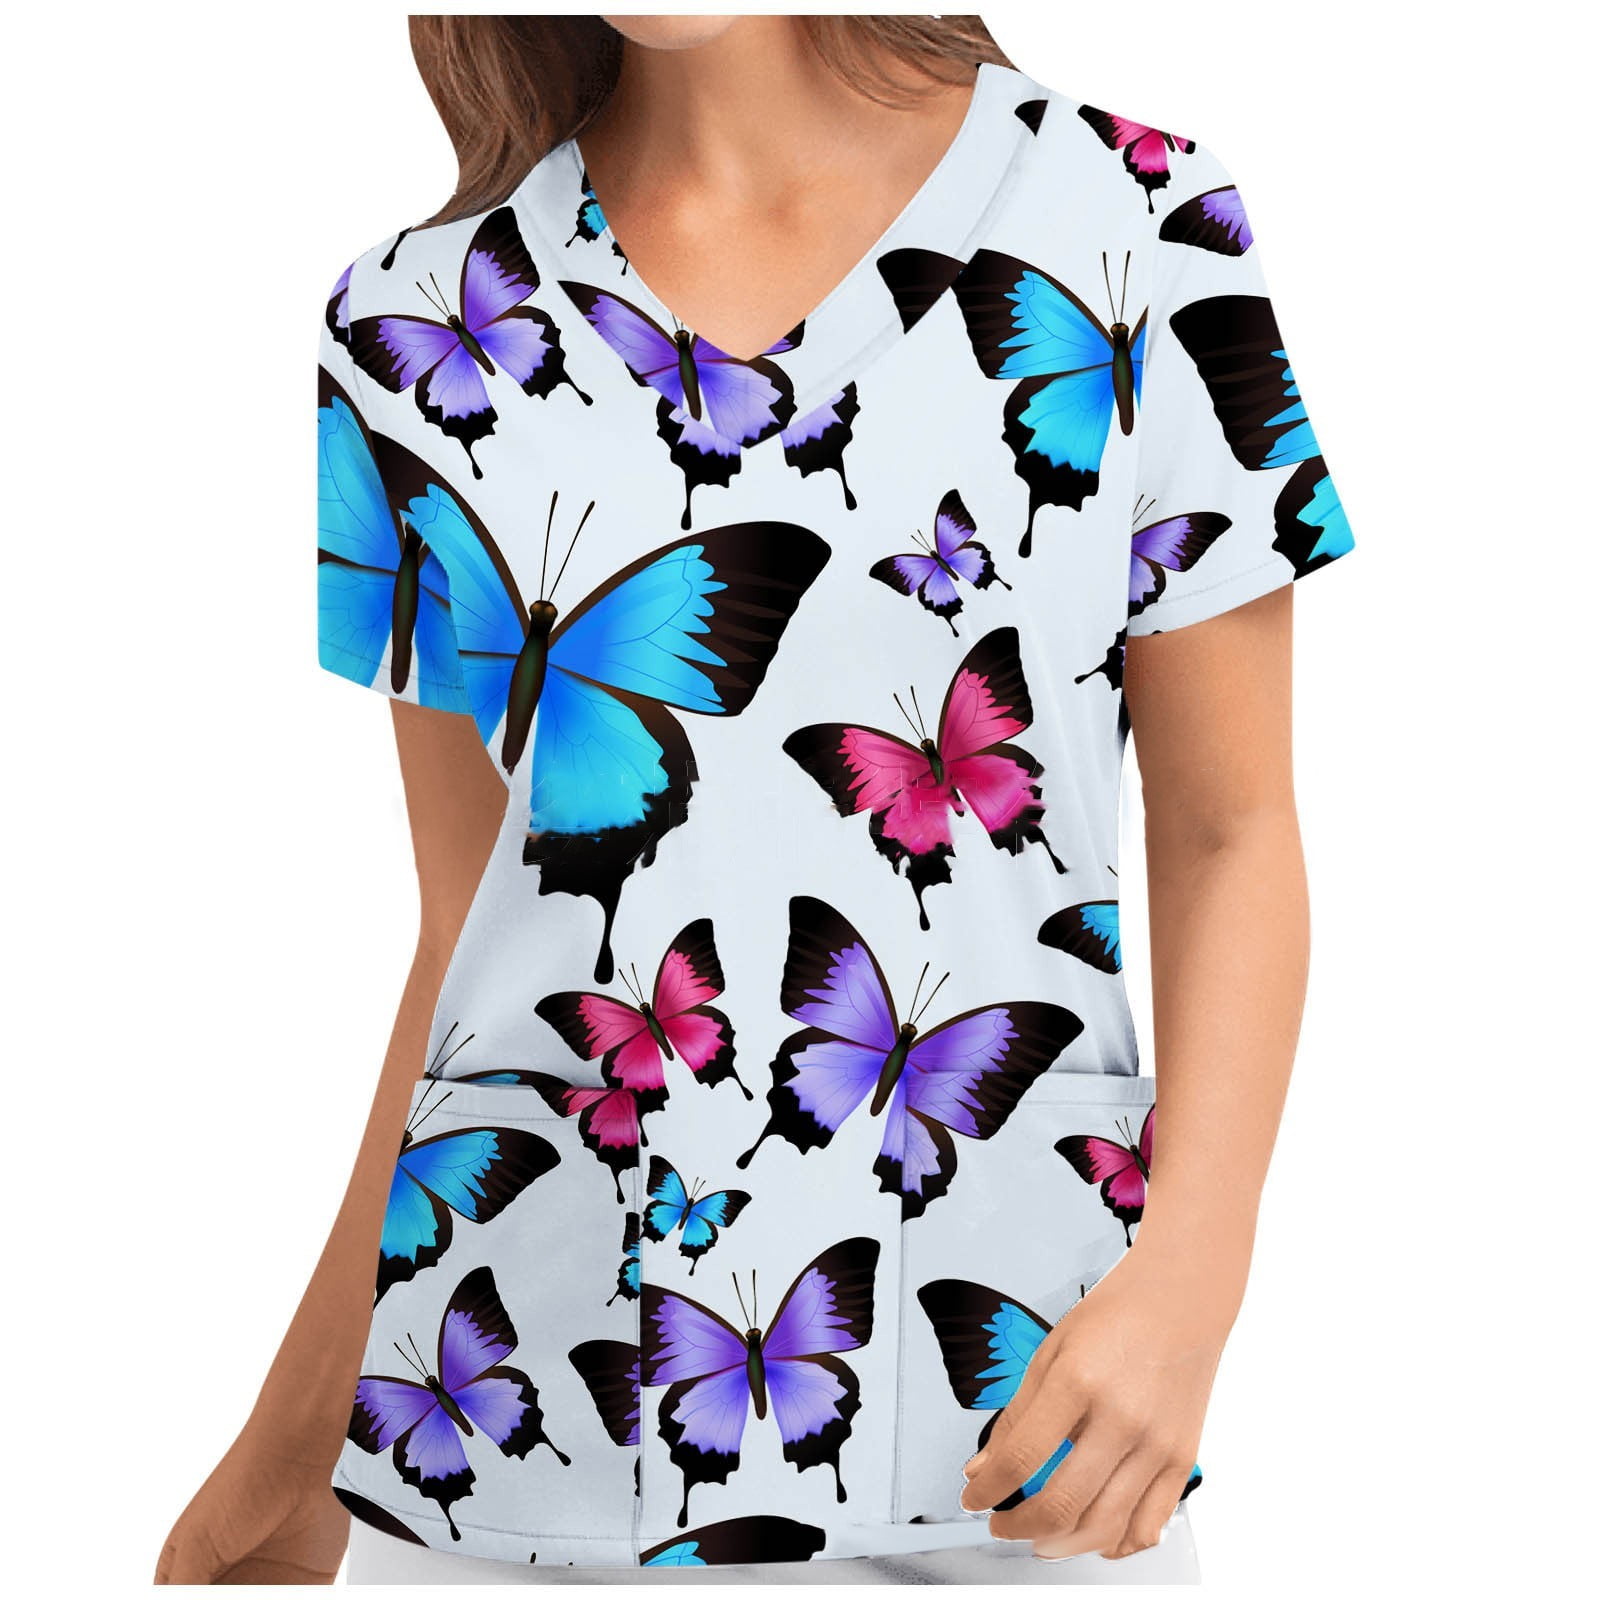 Details about   Womens Microfiber Medical Scrub Printed Tops Gray Butterflies Light Blue Loops L 